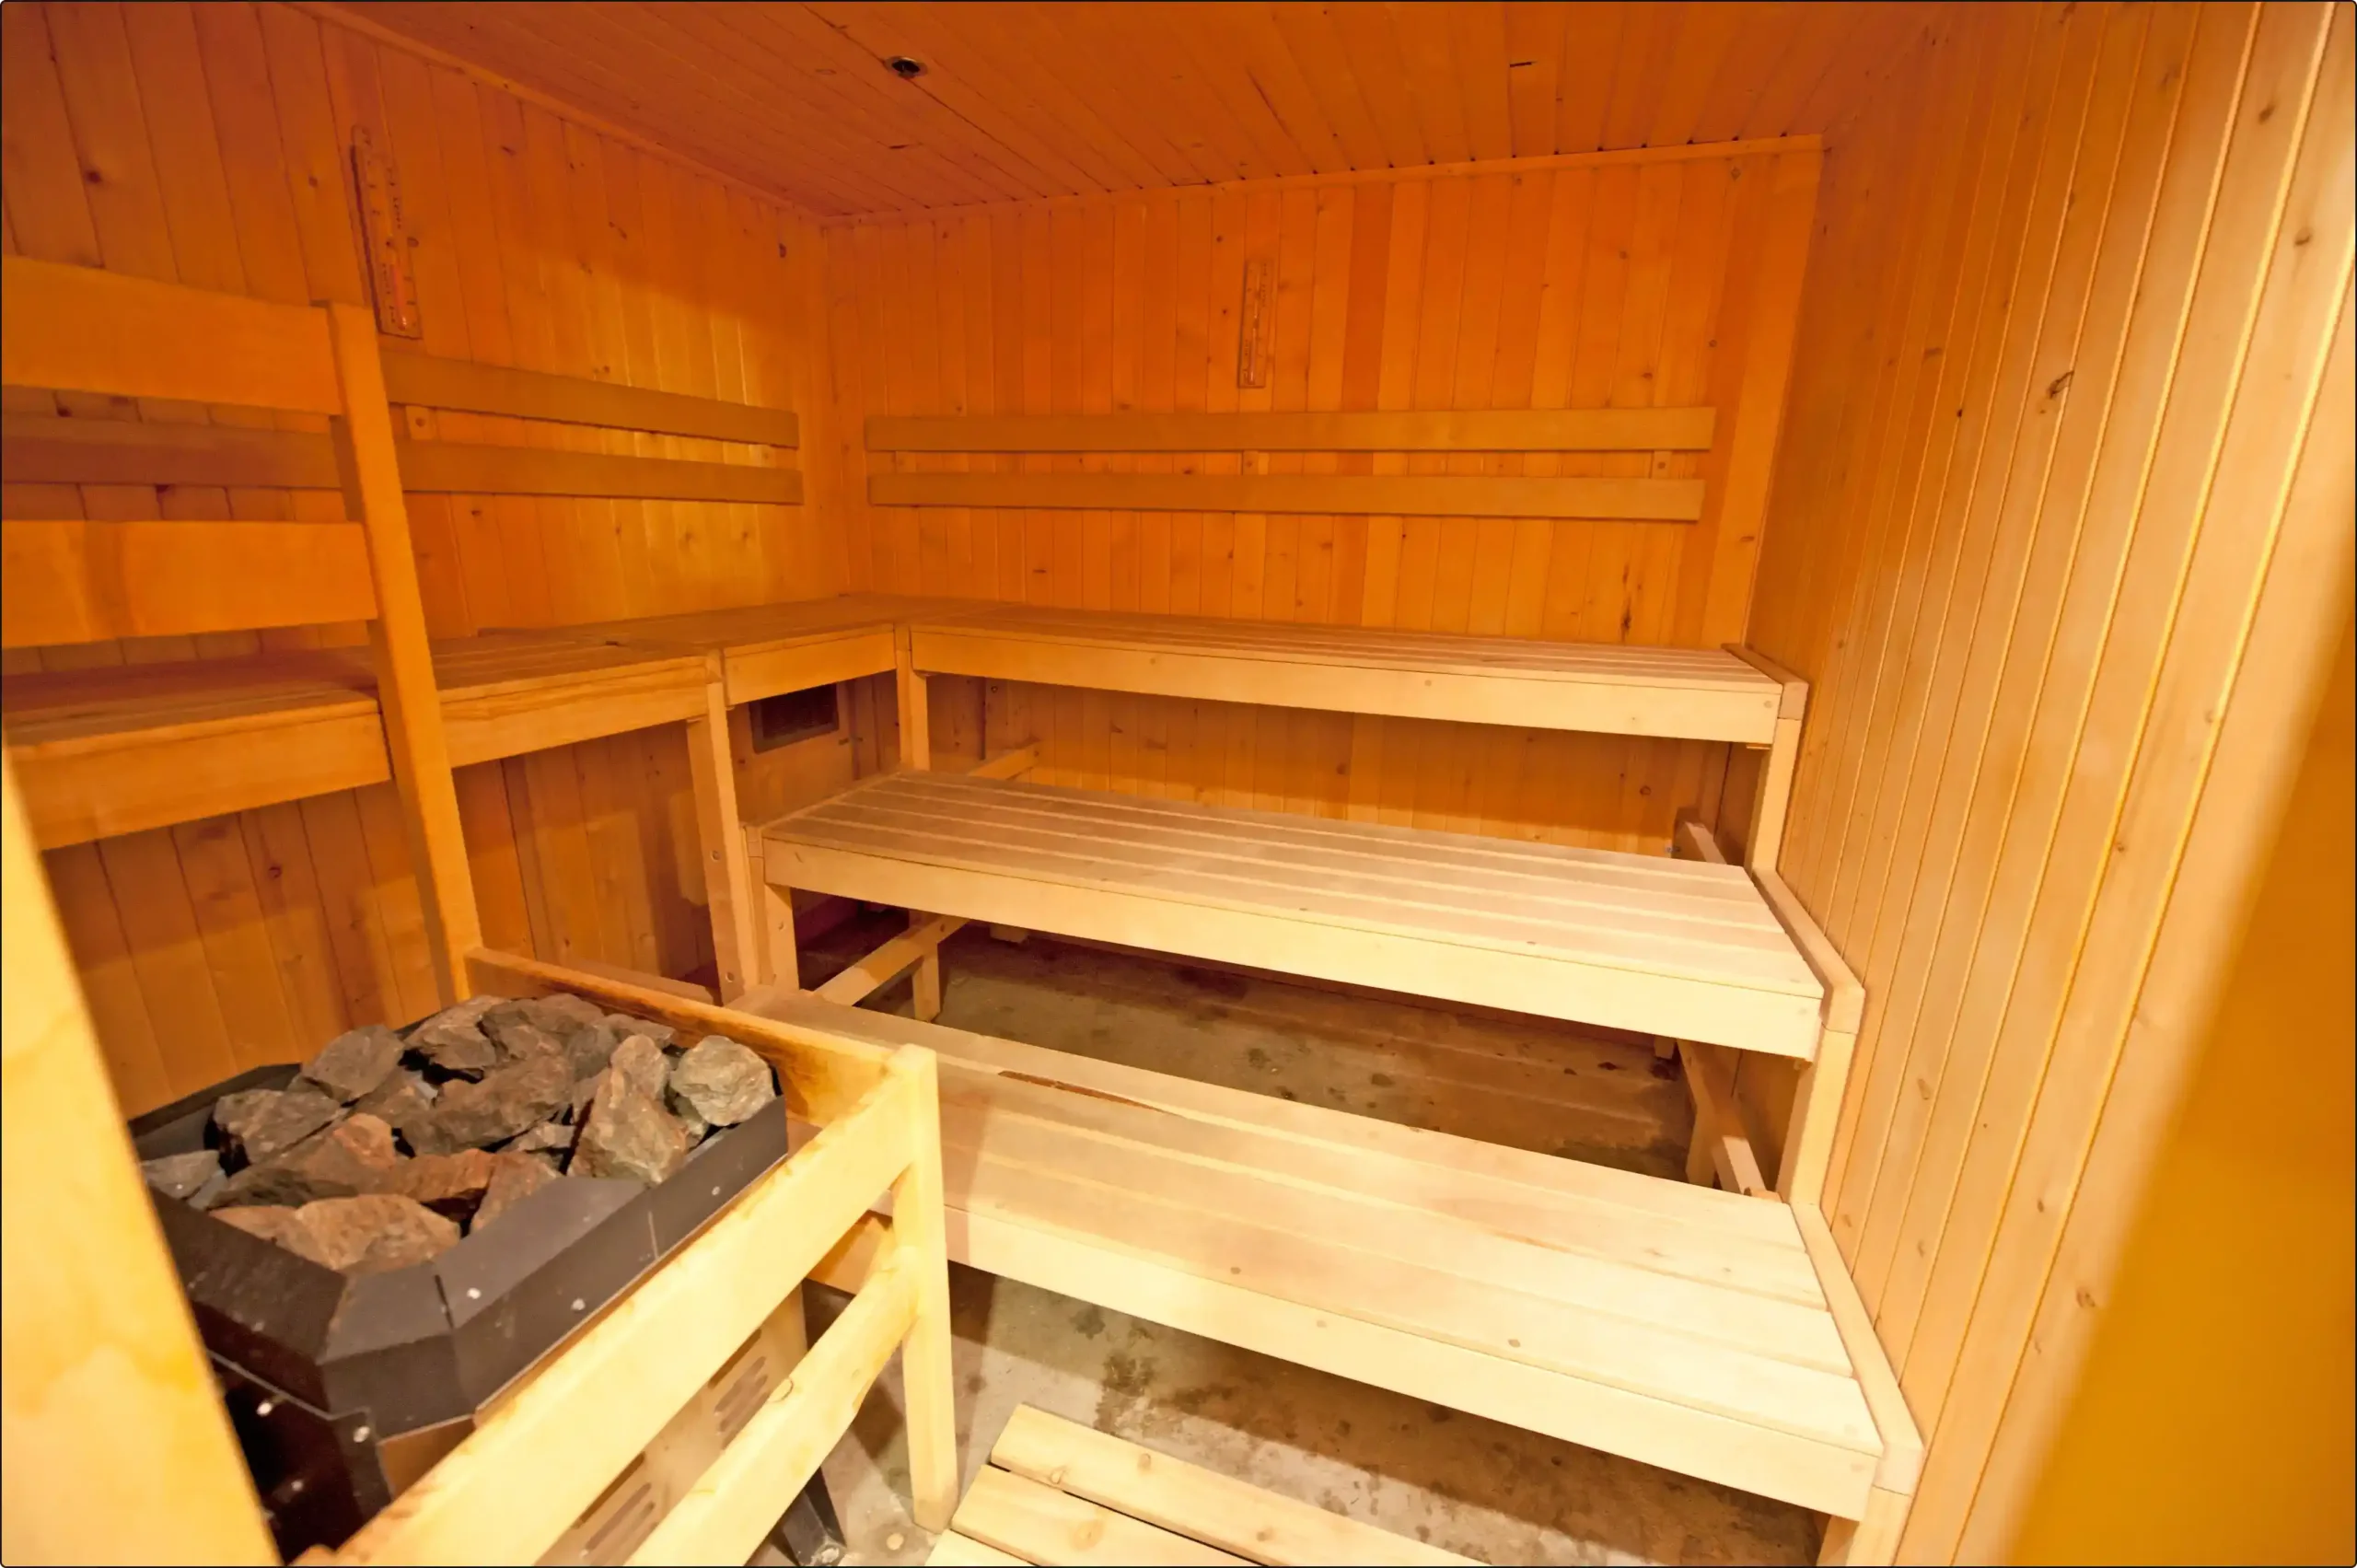 Medium sized sauna with hot rocks excellent for detox